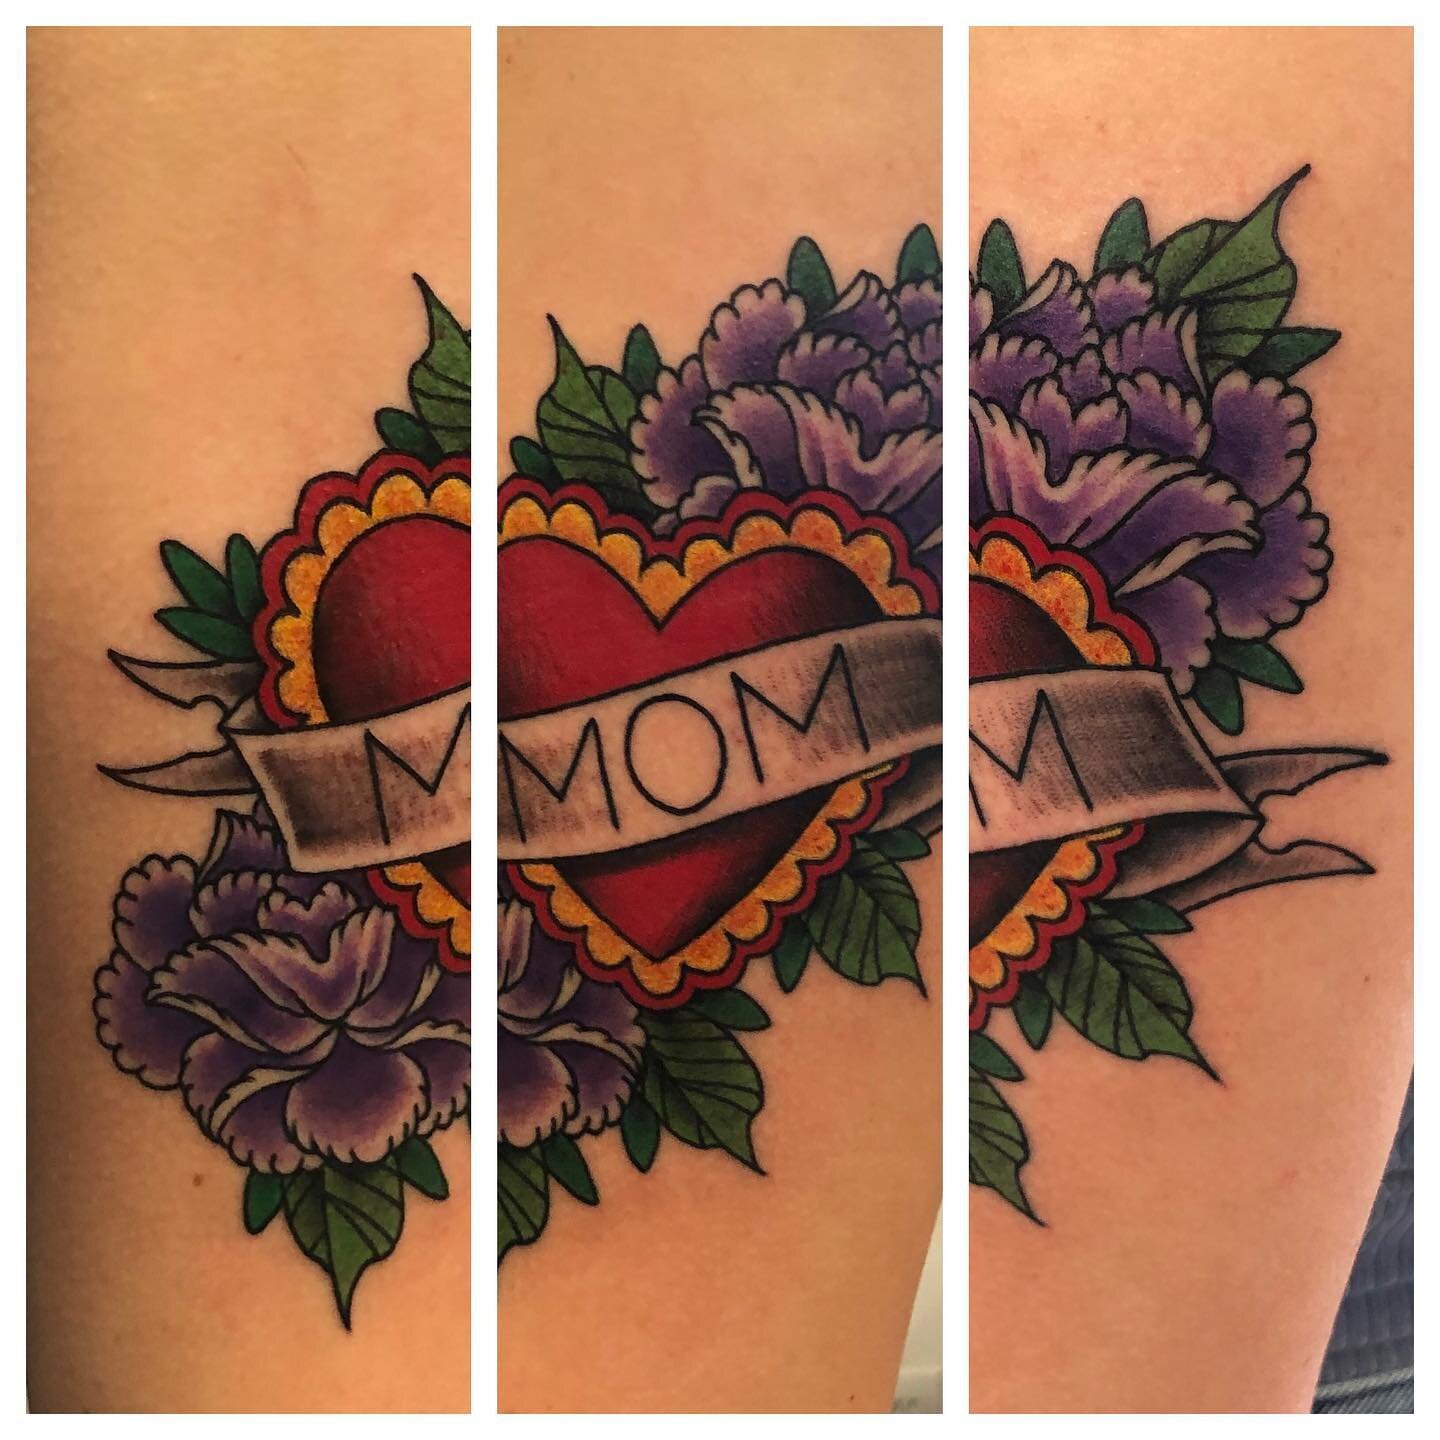 Was lucky enough to #tattoo this #traditionalmomtattoo yesterday. #traditionaltattoo #momtattoo #chickswithtattoos #myclientsrule #homewardboundtattoo #westbendtattoo